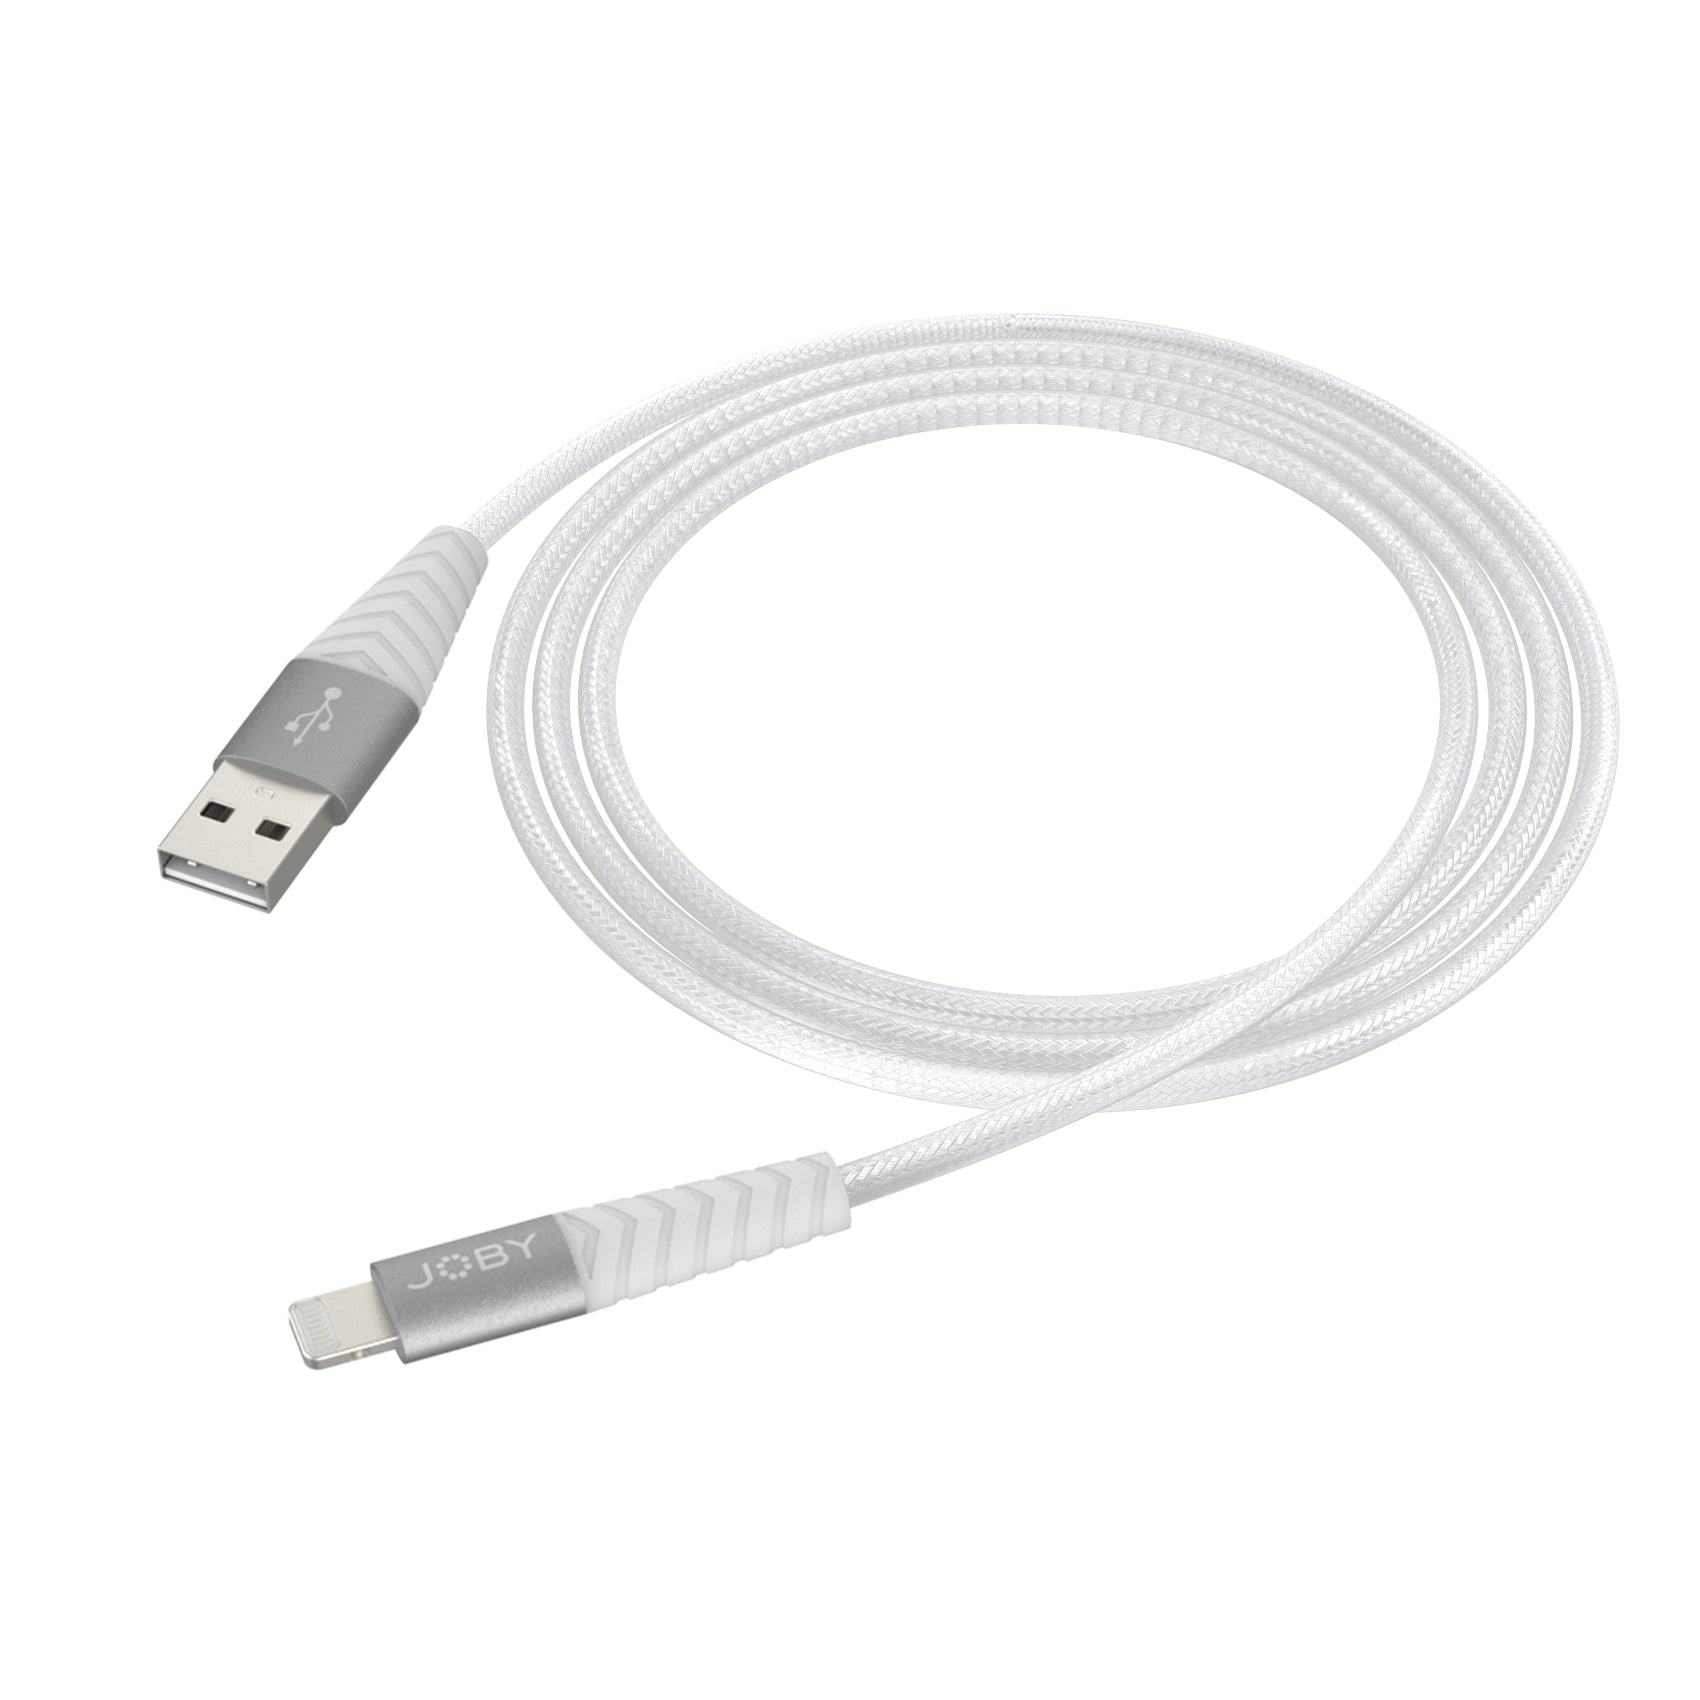 Joby Charge and Sync Lightning Cable - 1.2m/4ft